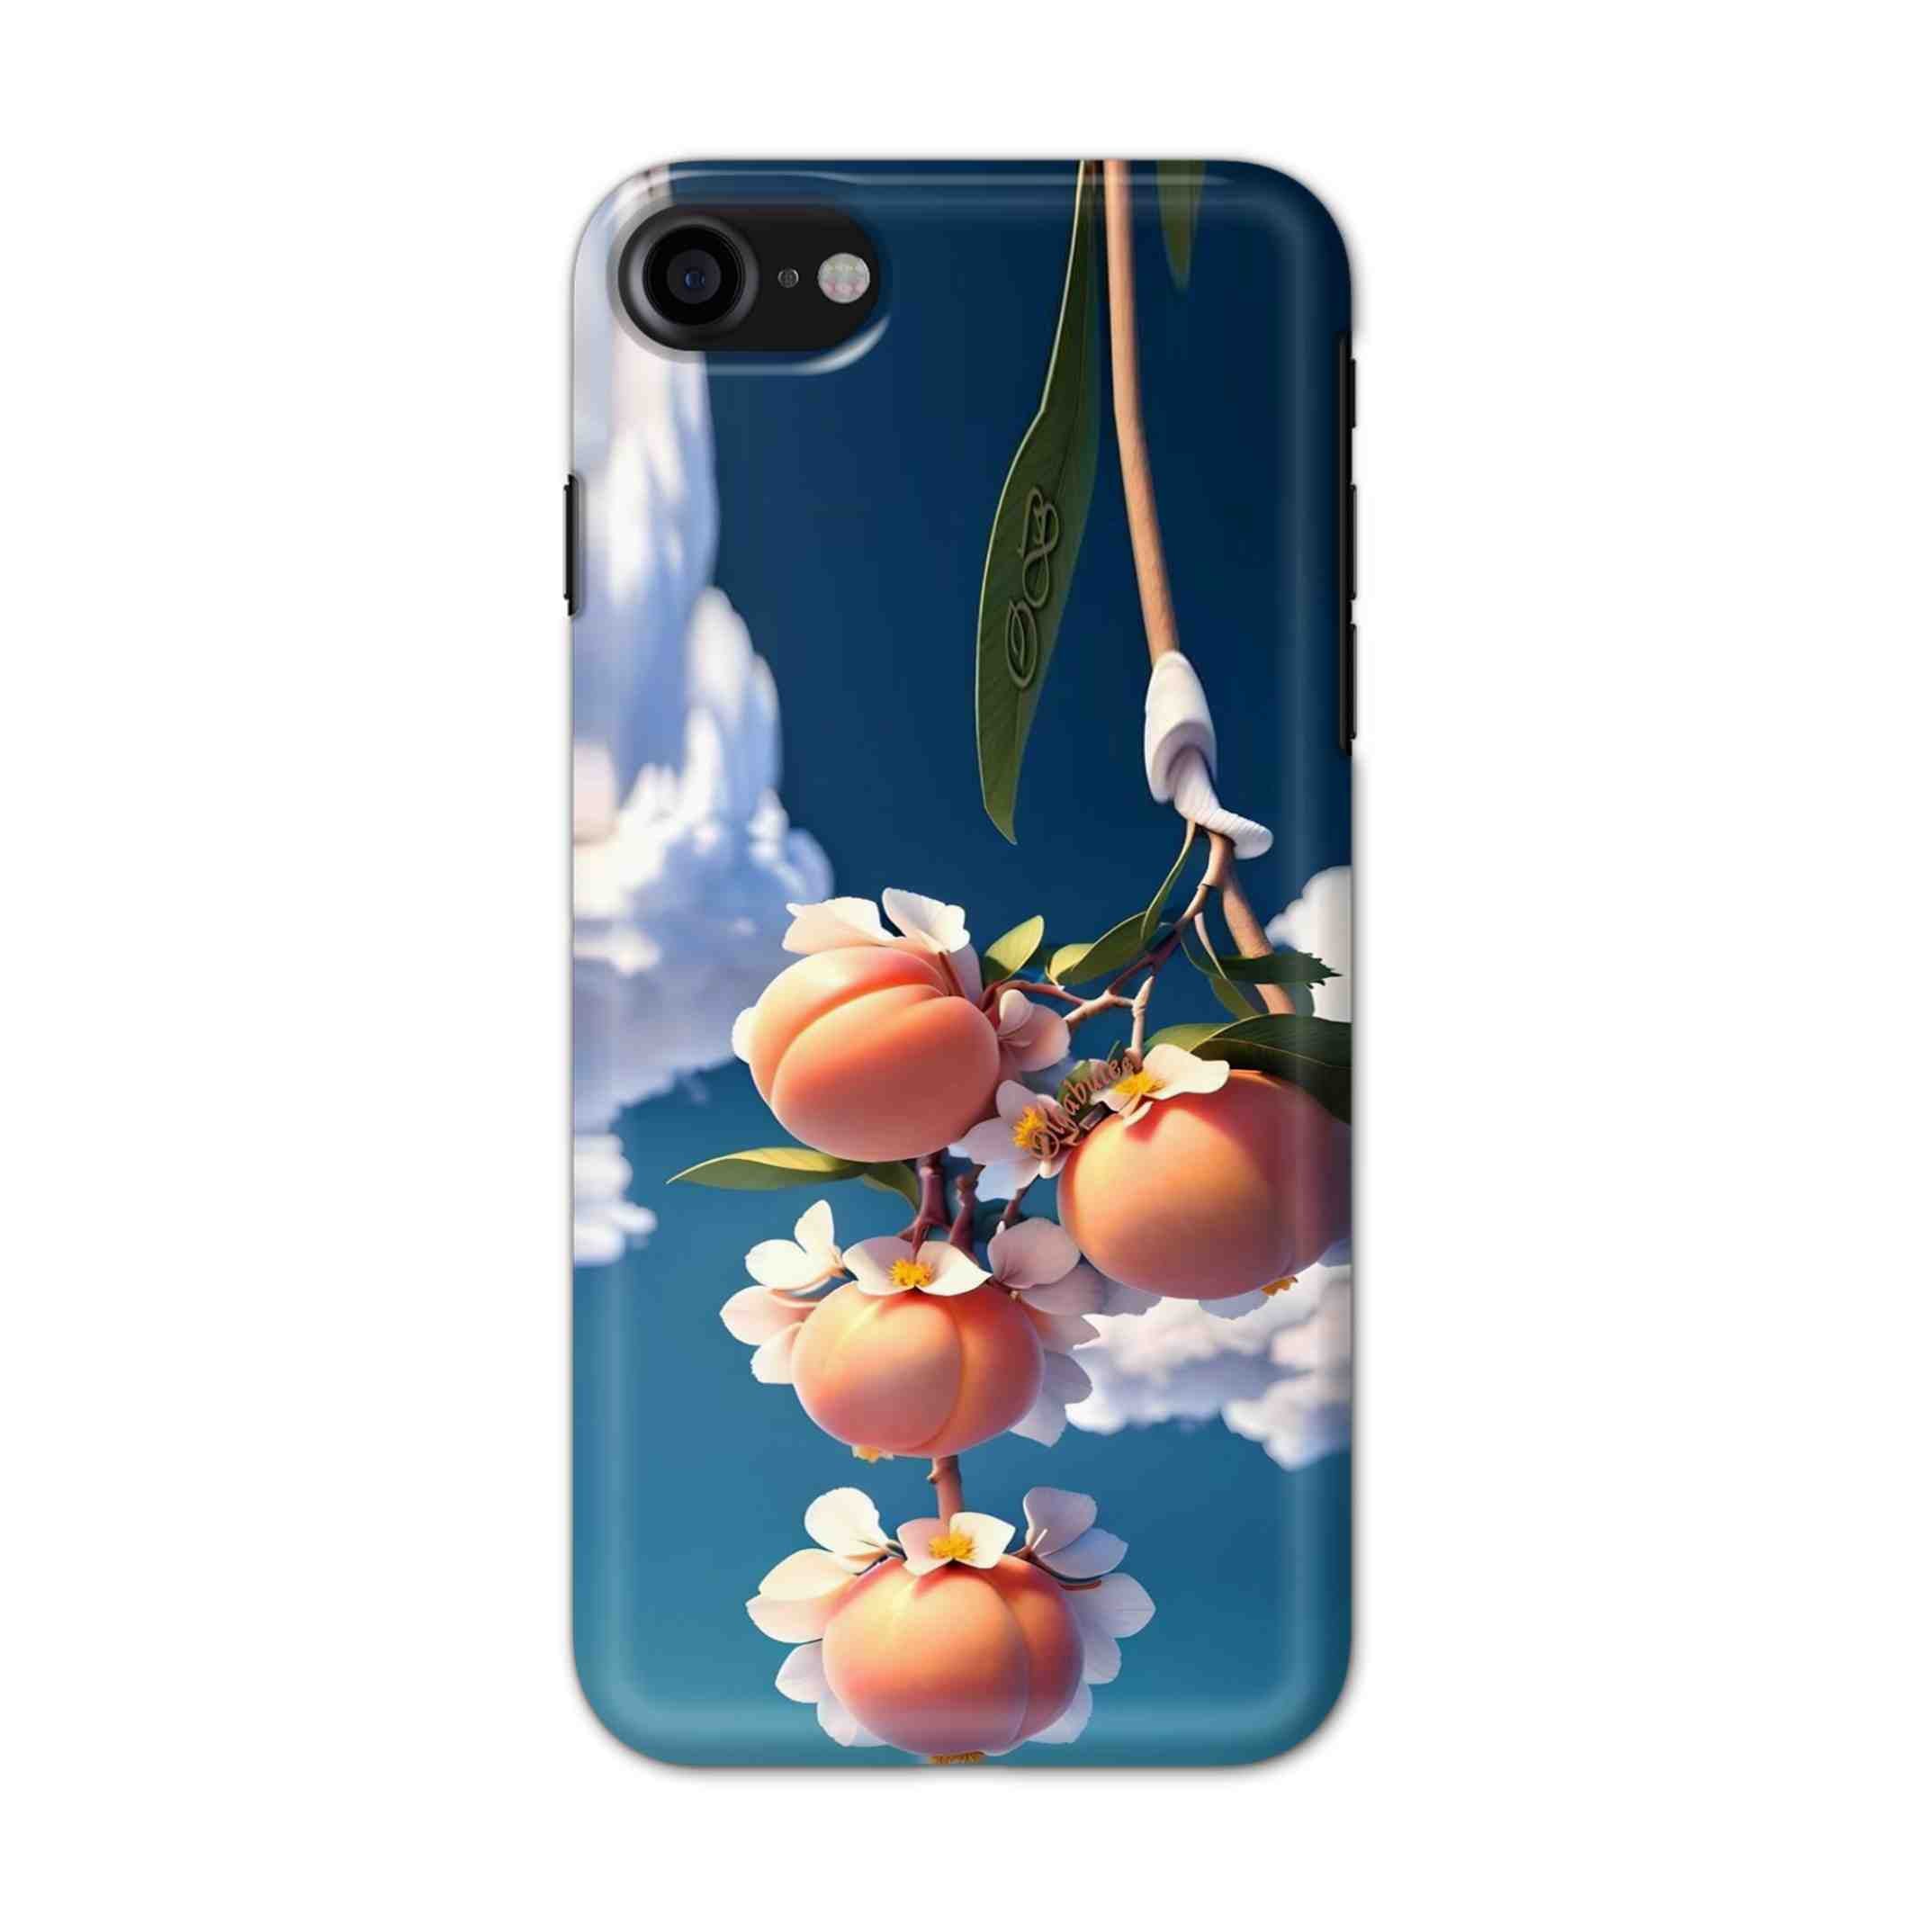 Buy Fruit Hard Back Mobile Phone Case/Cover For iPhone 7 / 8 Online